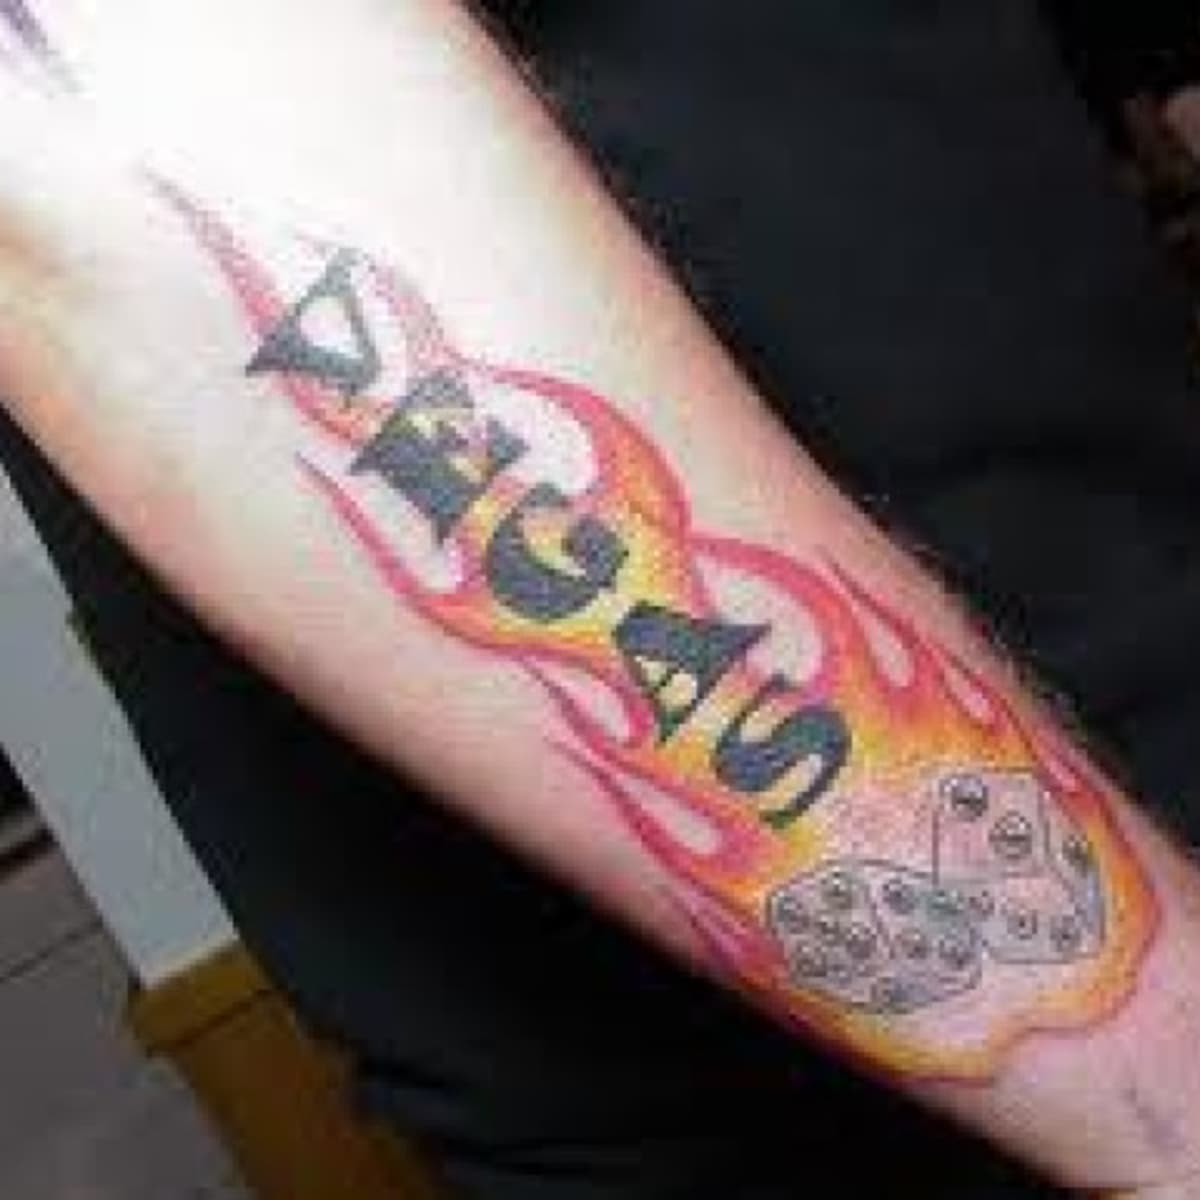 Very popular boys and girls name tattoo designs  name tattoo ideas for men  and women  name tattoos  YouTube